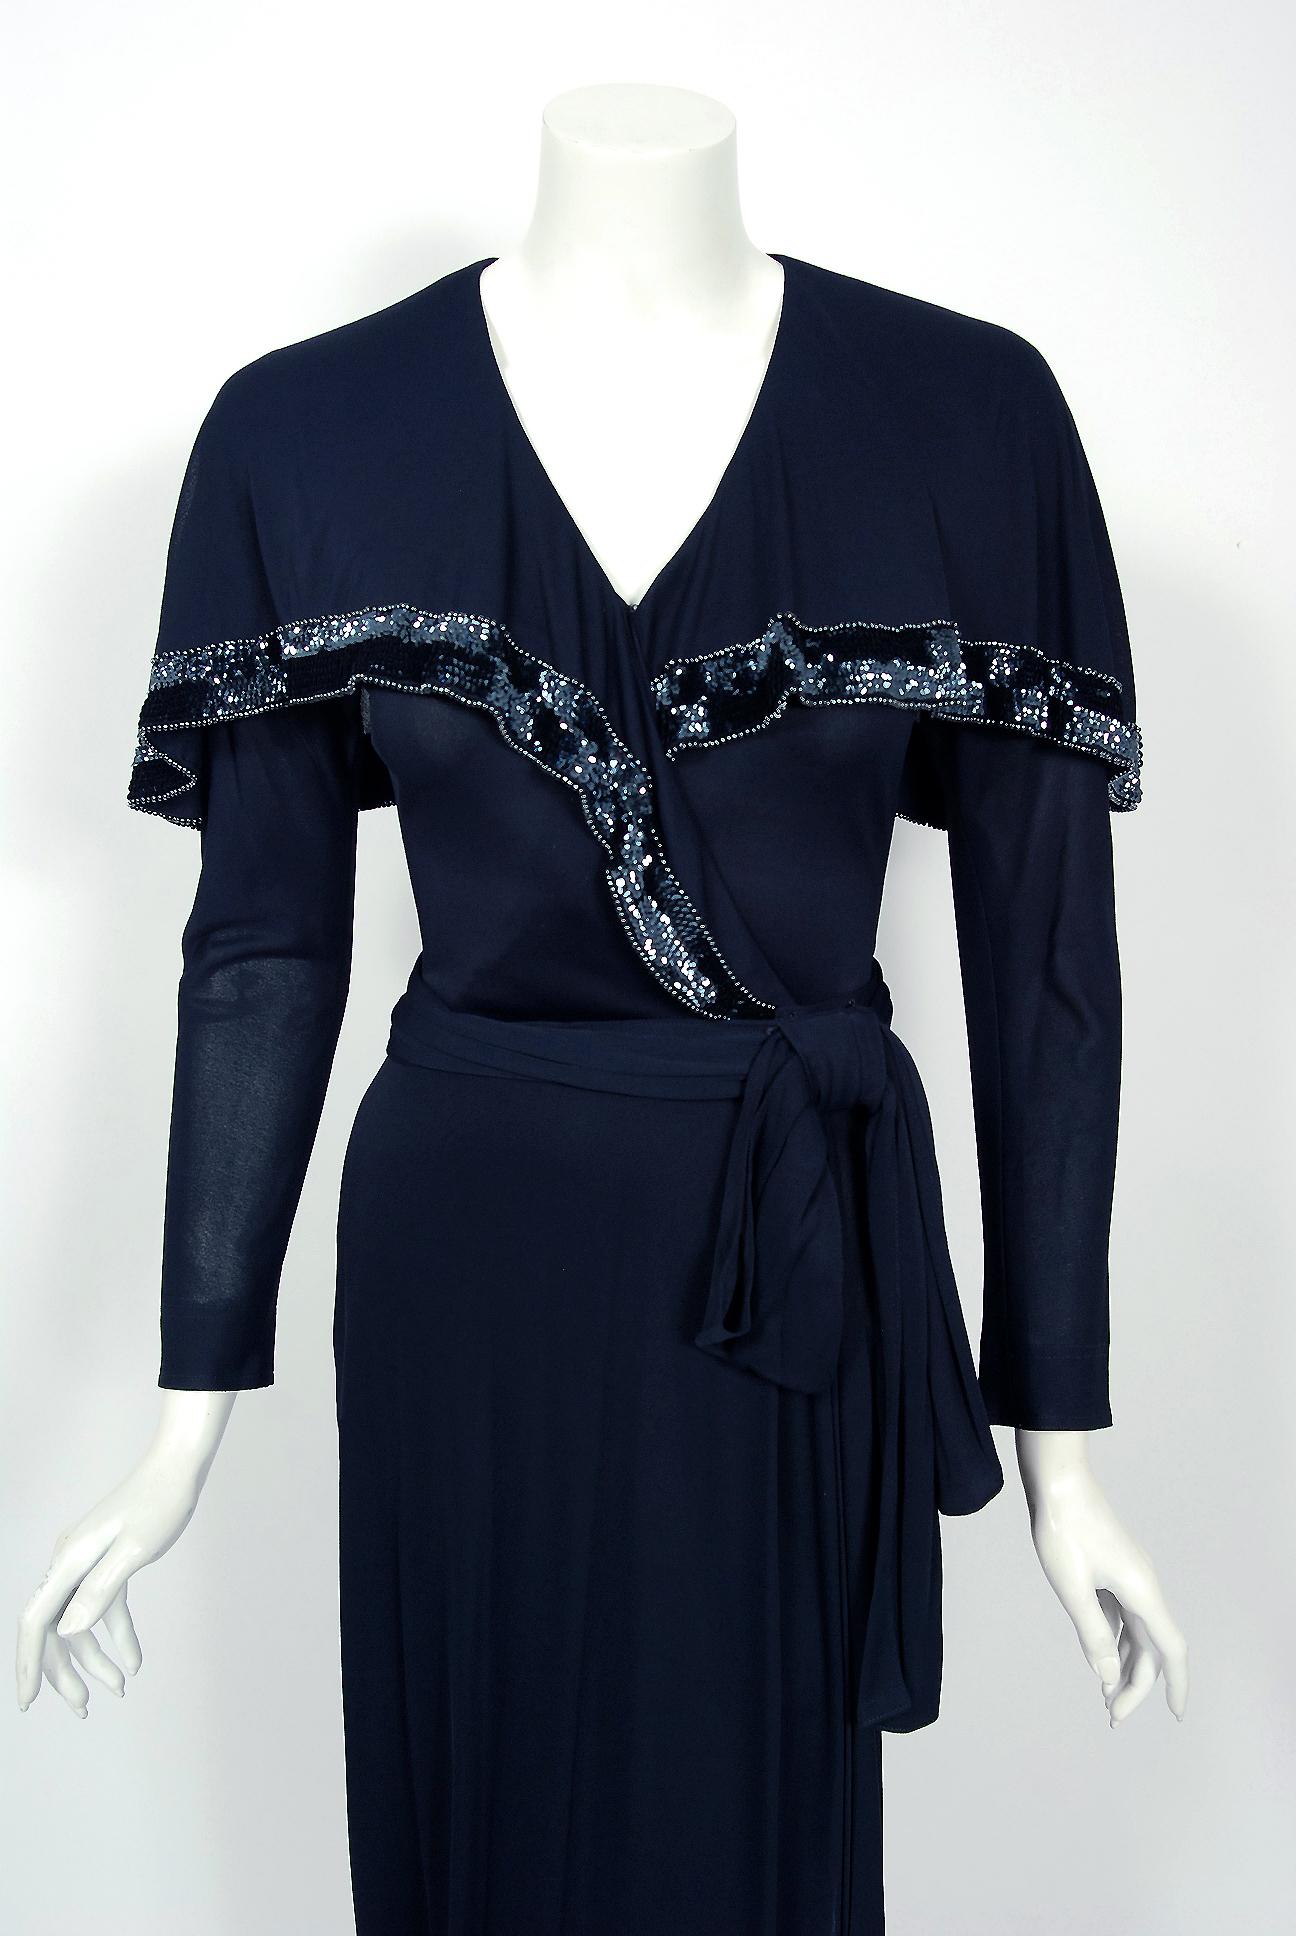 A gorgeous 1977 Jean Muir designer silk-jersey dress with original deadstock $2895 price tags still attached. The self-taught Muir made her name in the 1960's, creating a reputation for exquisitely tailored, timeless, feminine clothing. Muir is